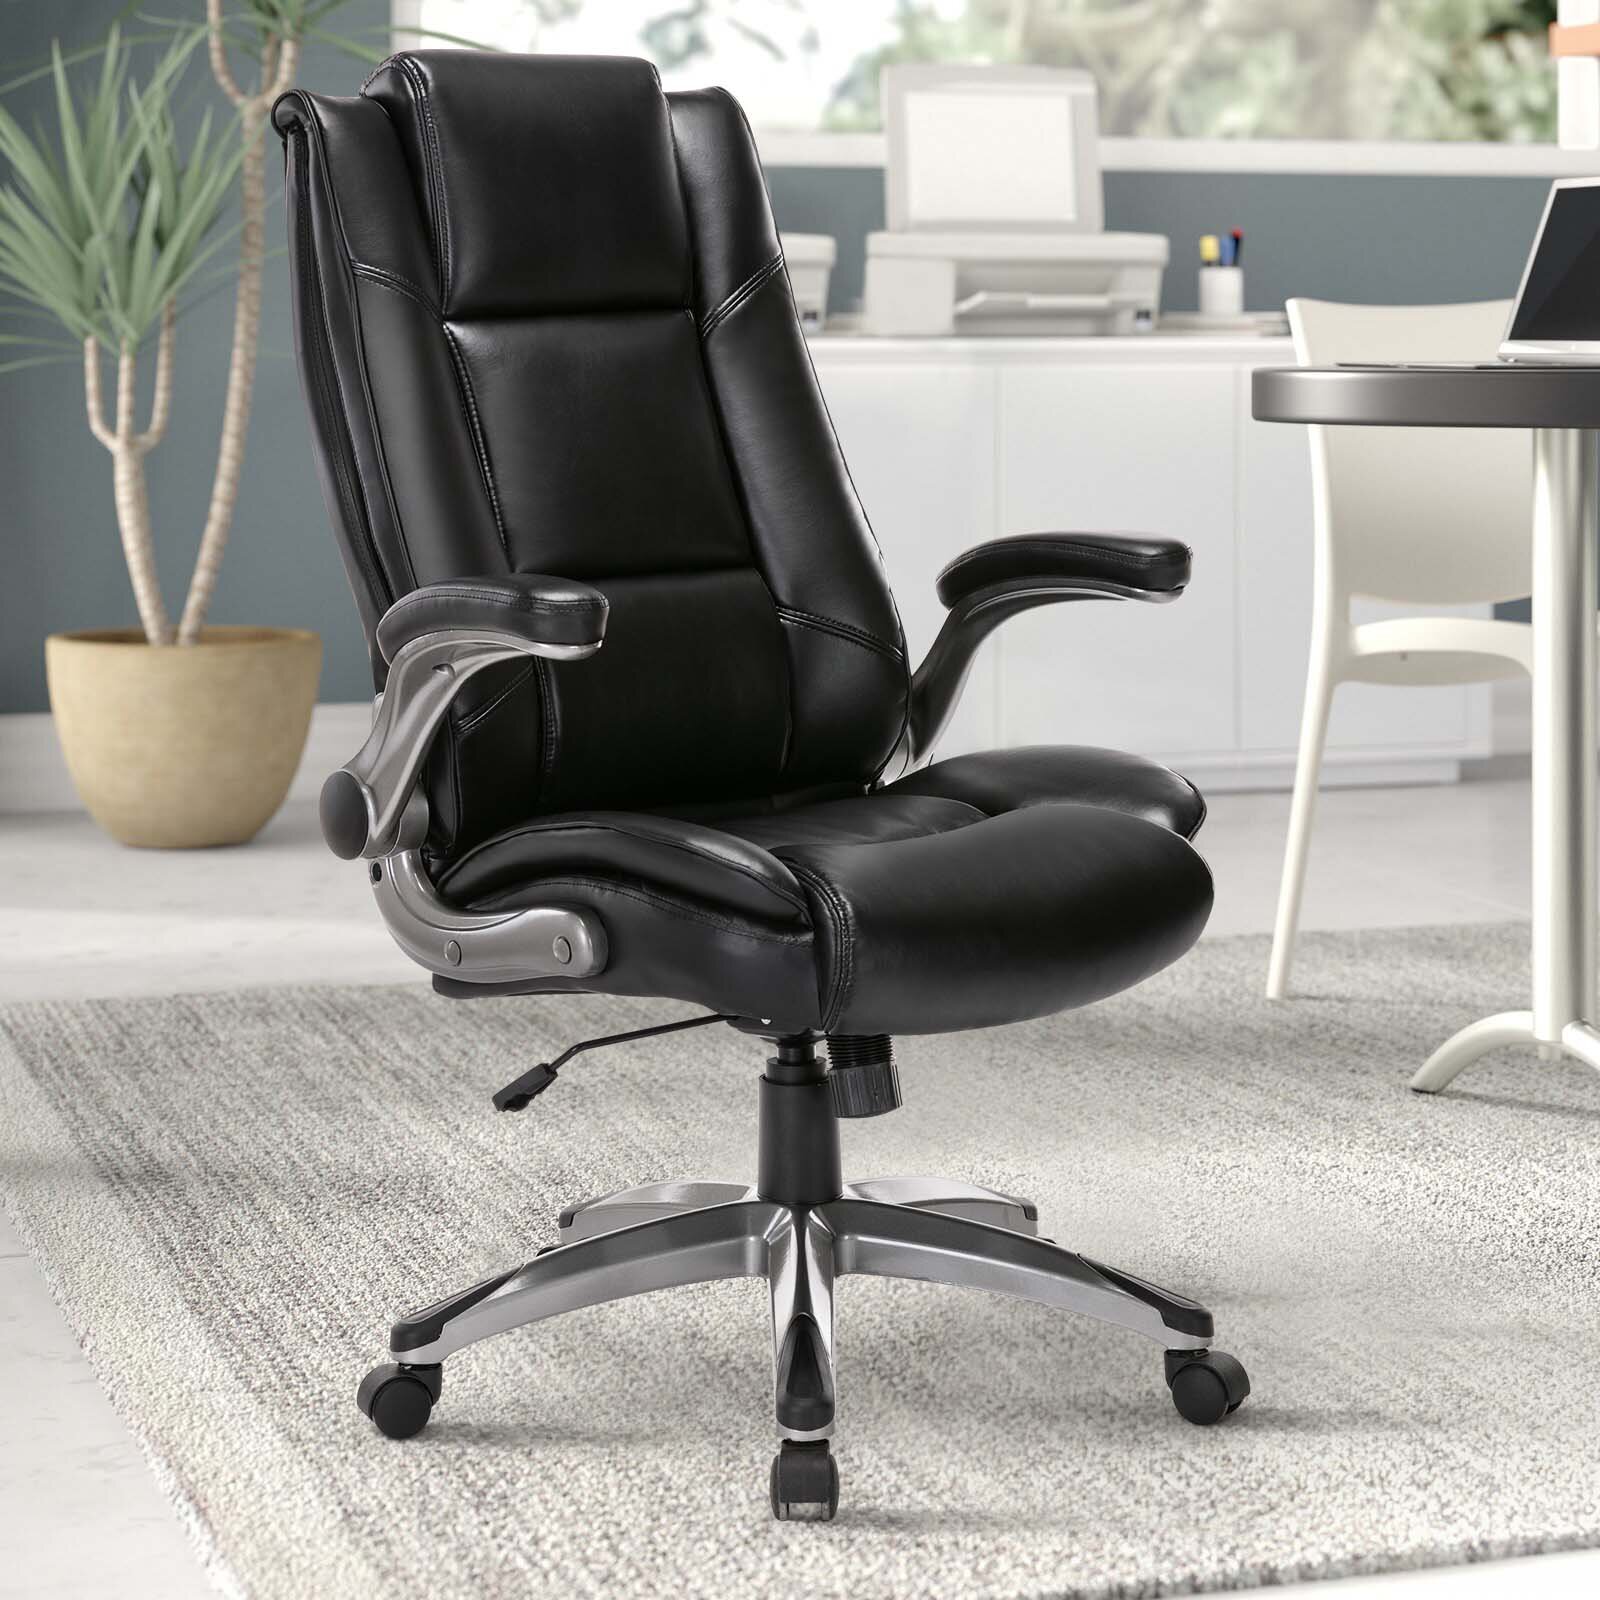 Basics Extra Comfort High-Back Leather Executive Chair with Flip-Up Arms and Lumbar Support 